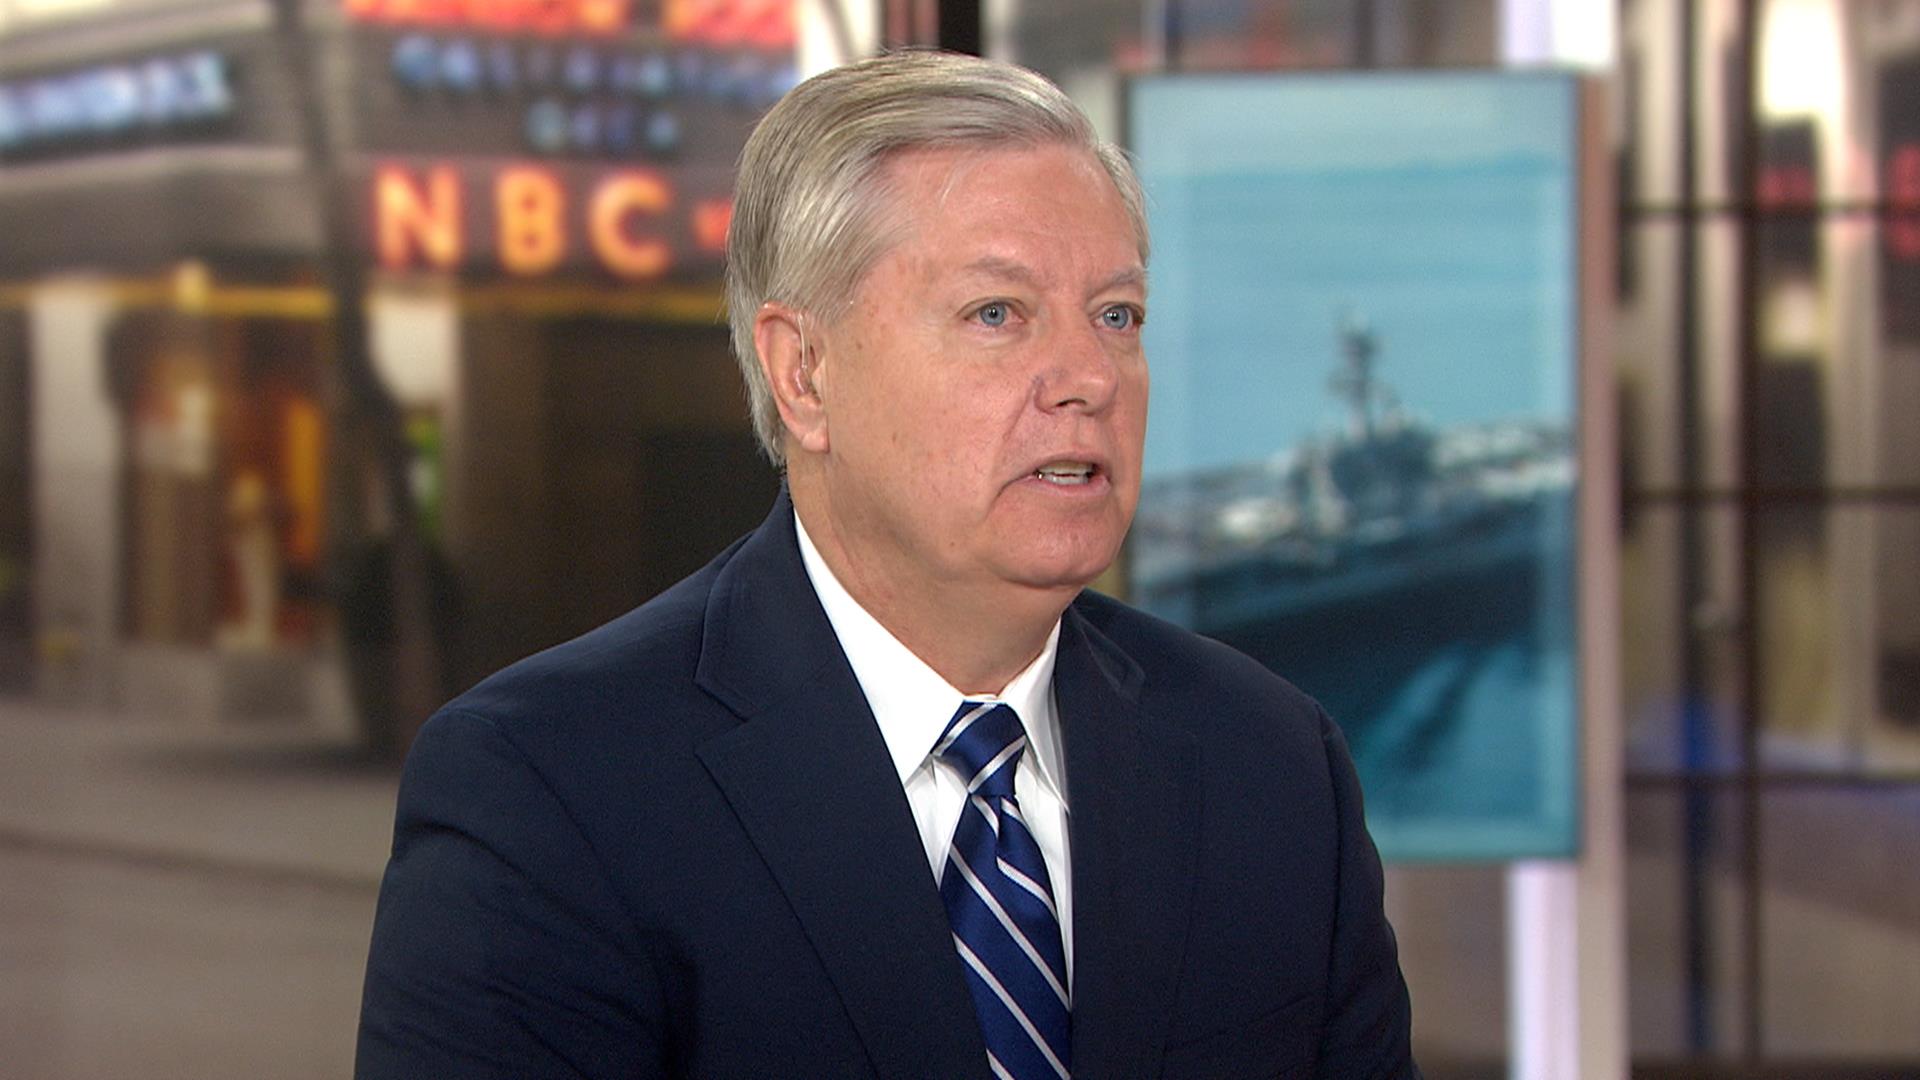 Lindsay Graham: ‘We’re on a collision course with North Korea’ - TODAY.com